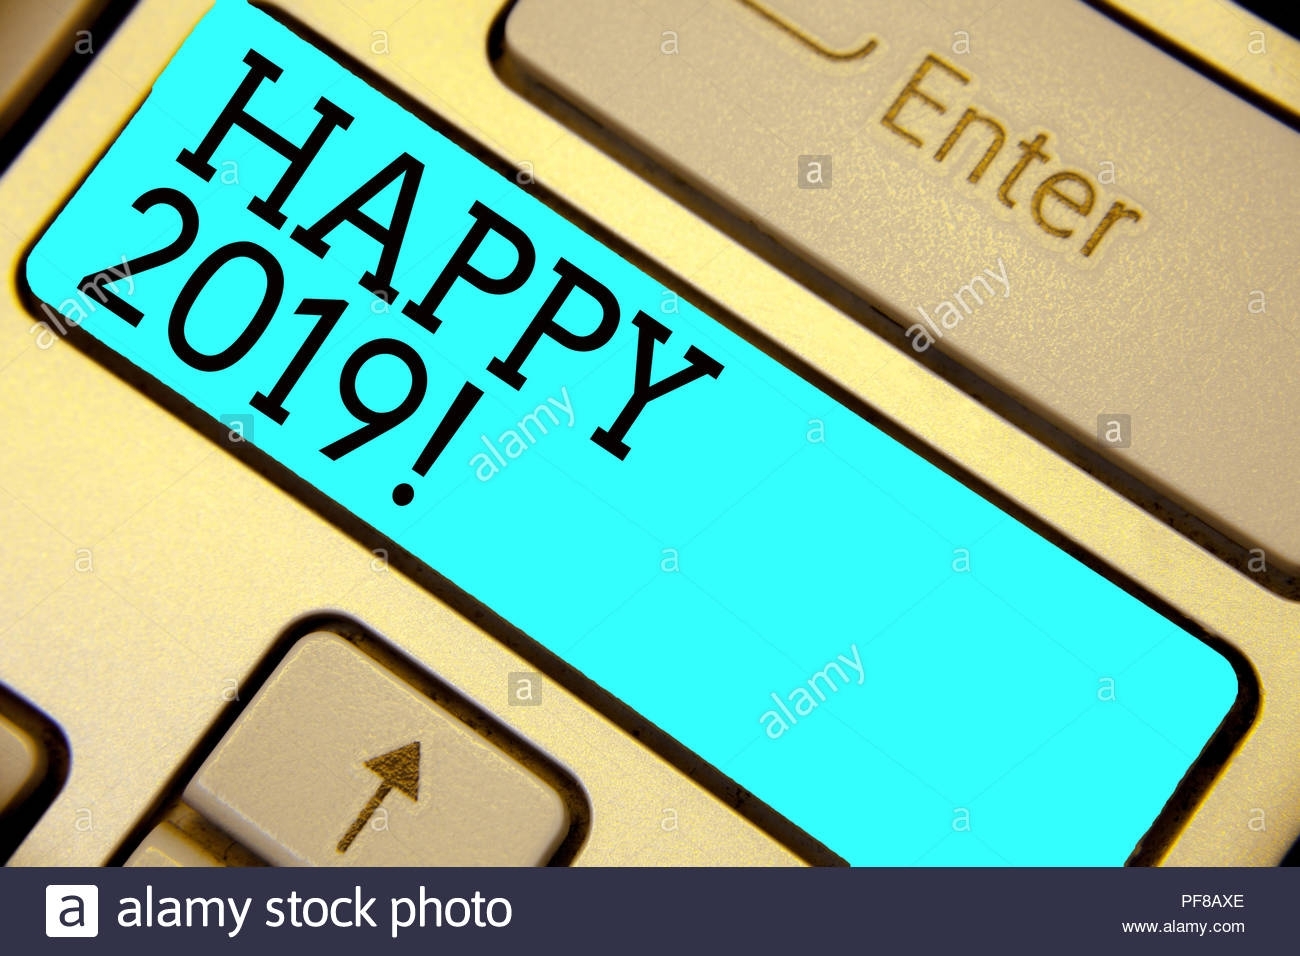 Handwriting Text Happy 2019. Concept Meaning Time Or Day At